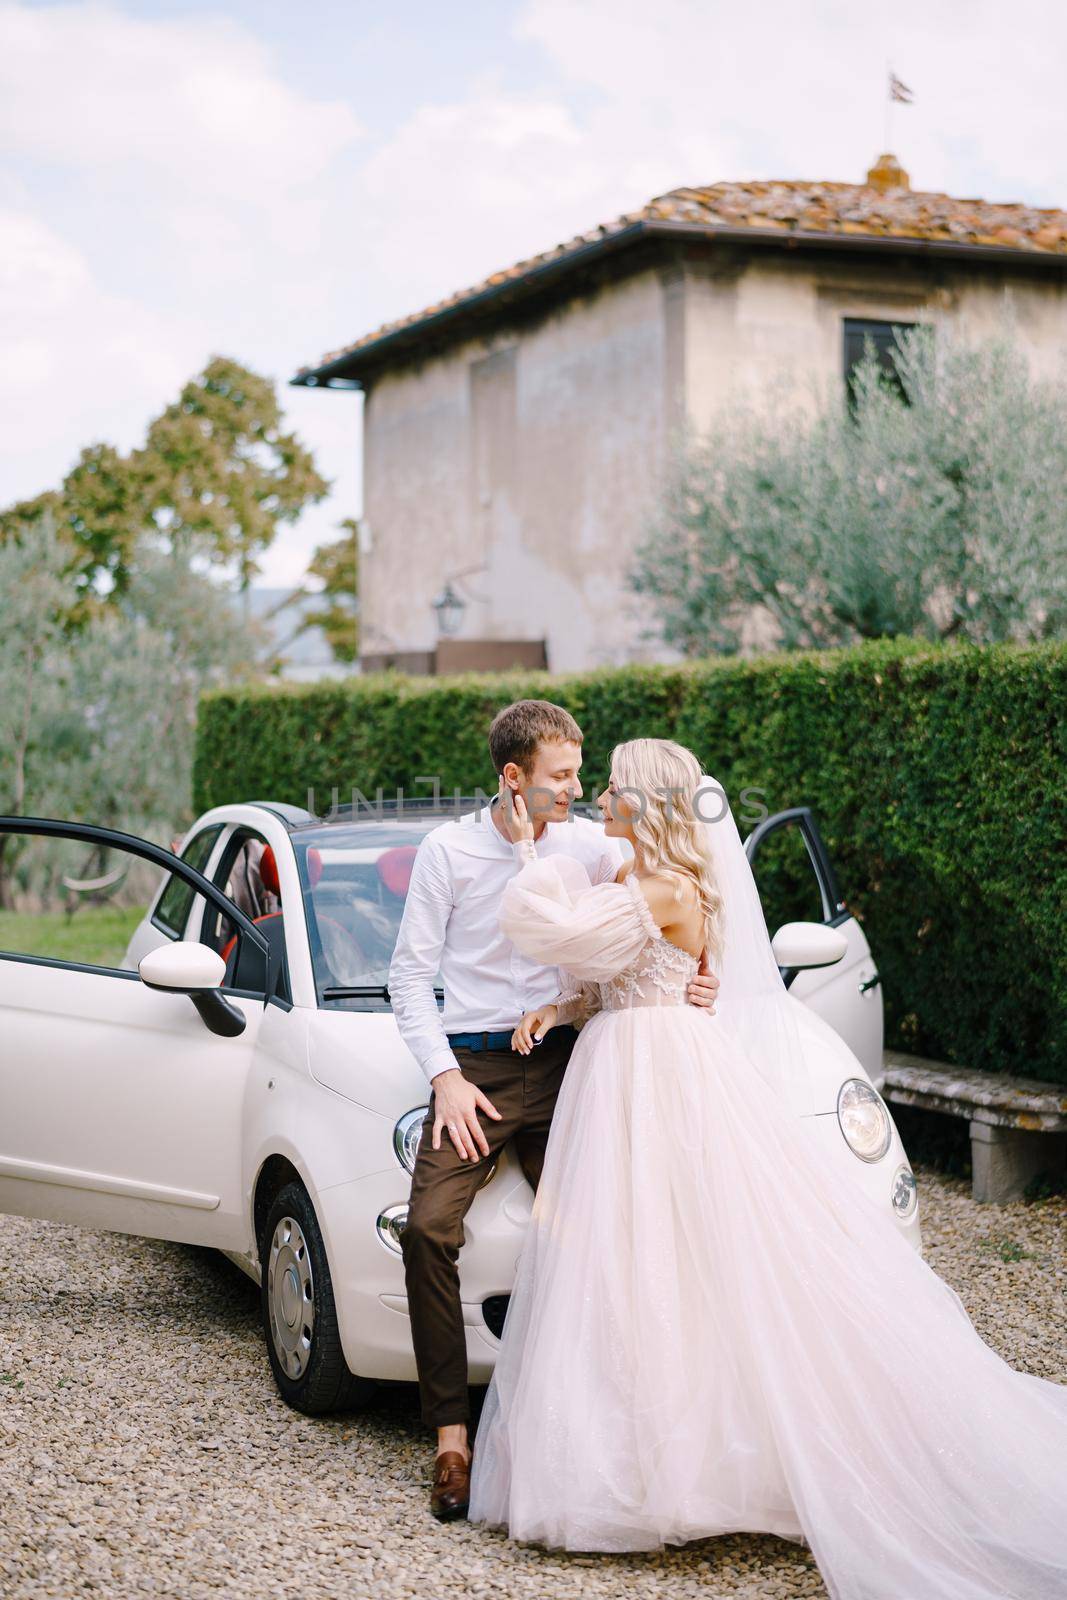 Beautiful bride and groom leaning on a convertible and looking at each other in the old villa in Italy, in Tuscany, near Florence by Nadtochiy